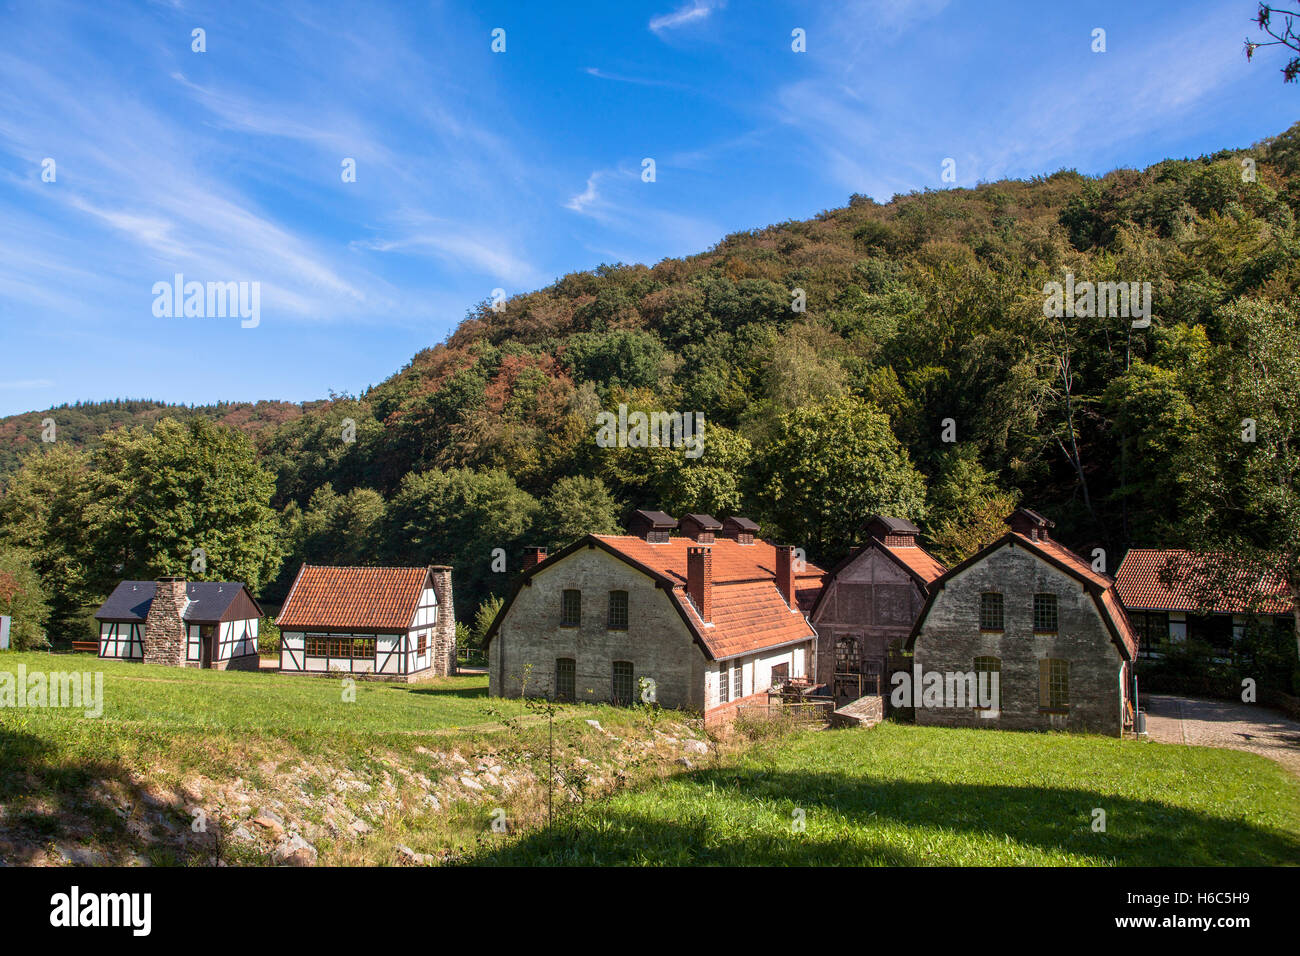 Germany, Hagen, Hagen Open-air Museum, this buildings housing a trip hammer used to craft scythes. Stock Photo